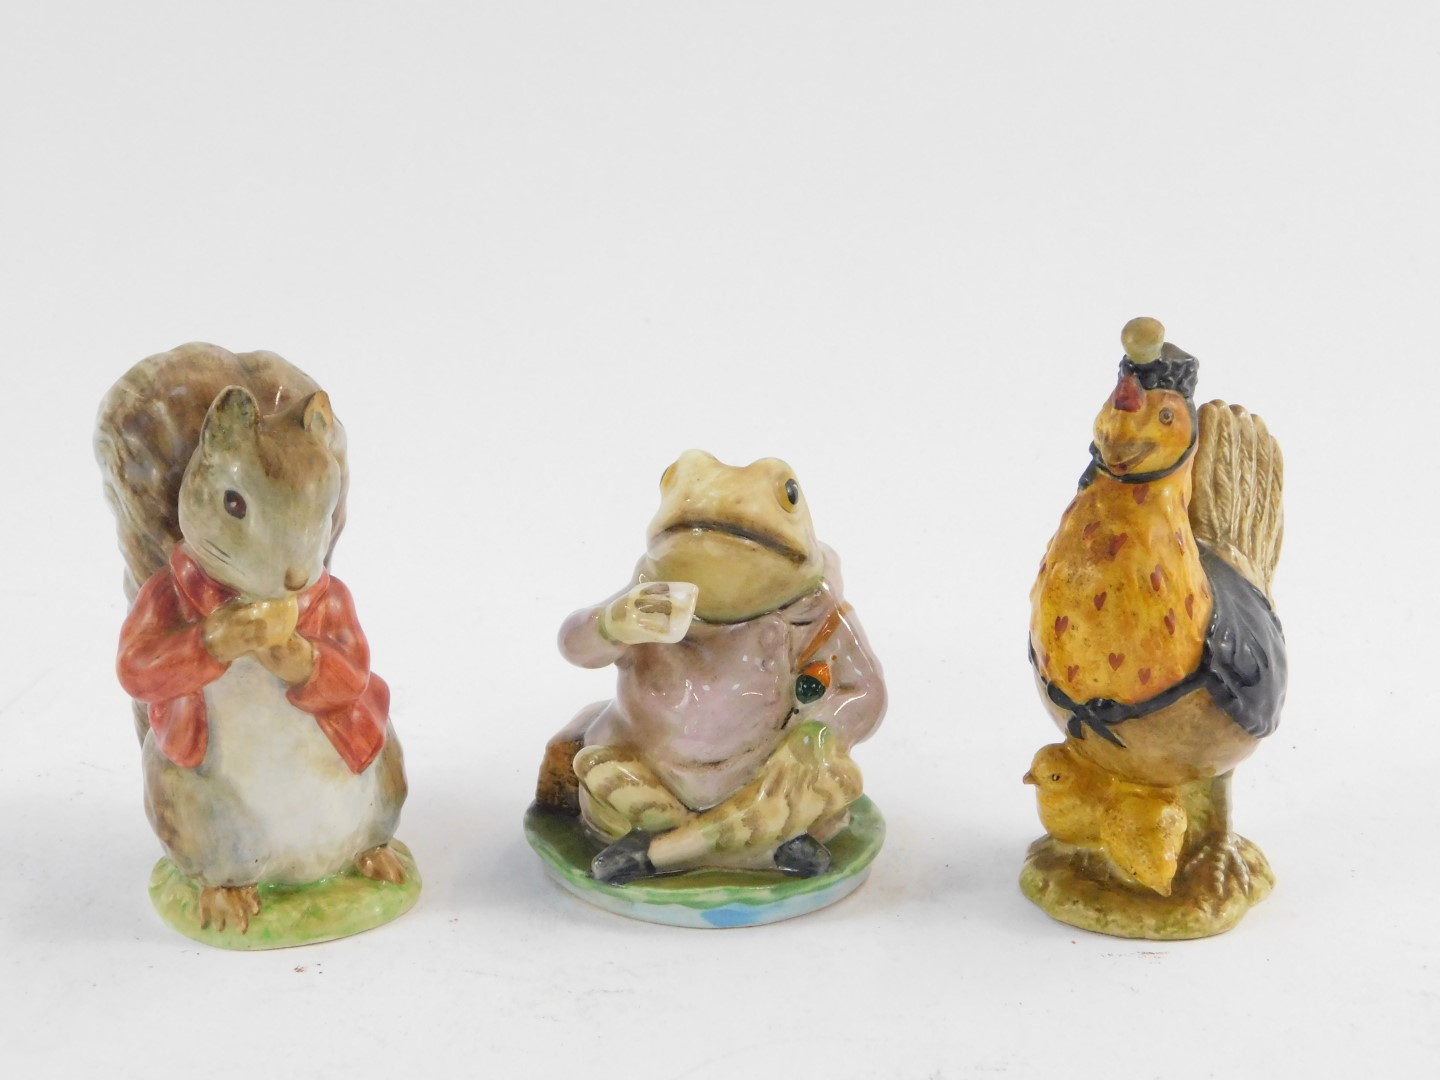 A Beswick Beatrix Potter figure modelled as Timmy Tiptoes, F Warne & Company Ltd gold mark, together